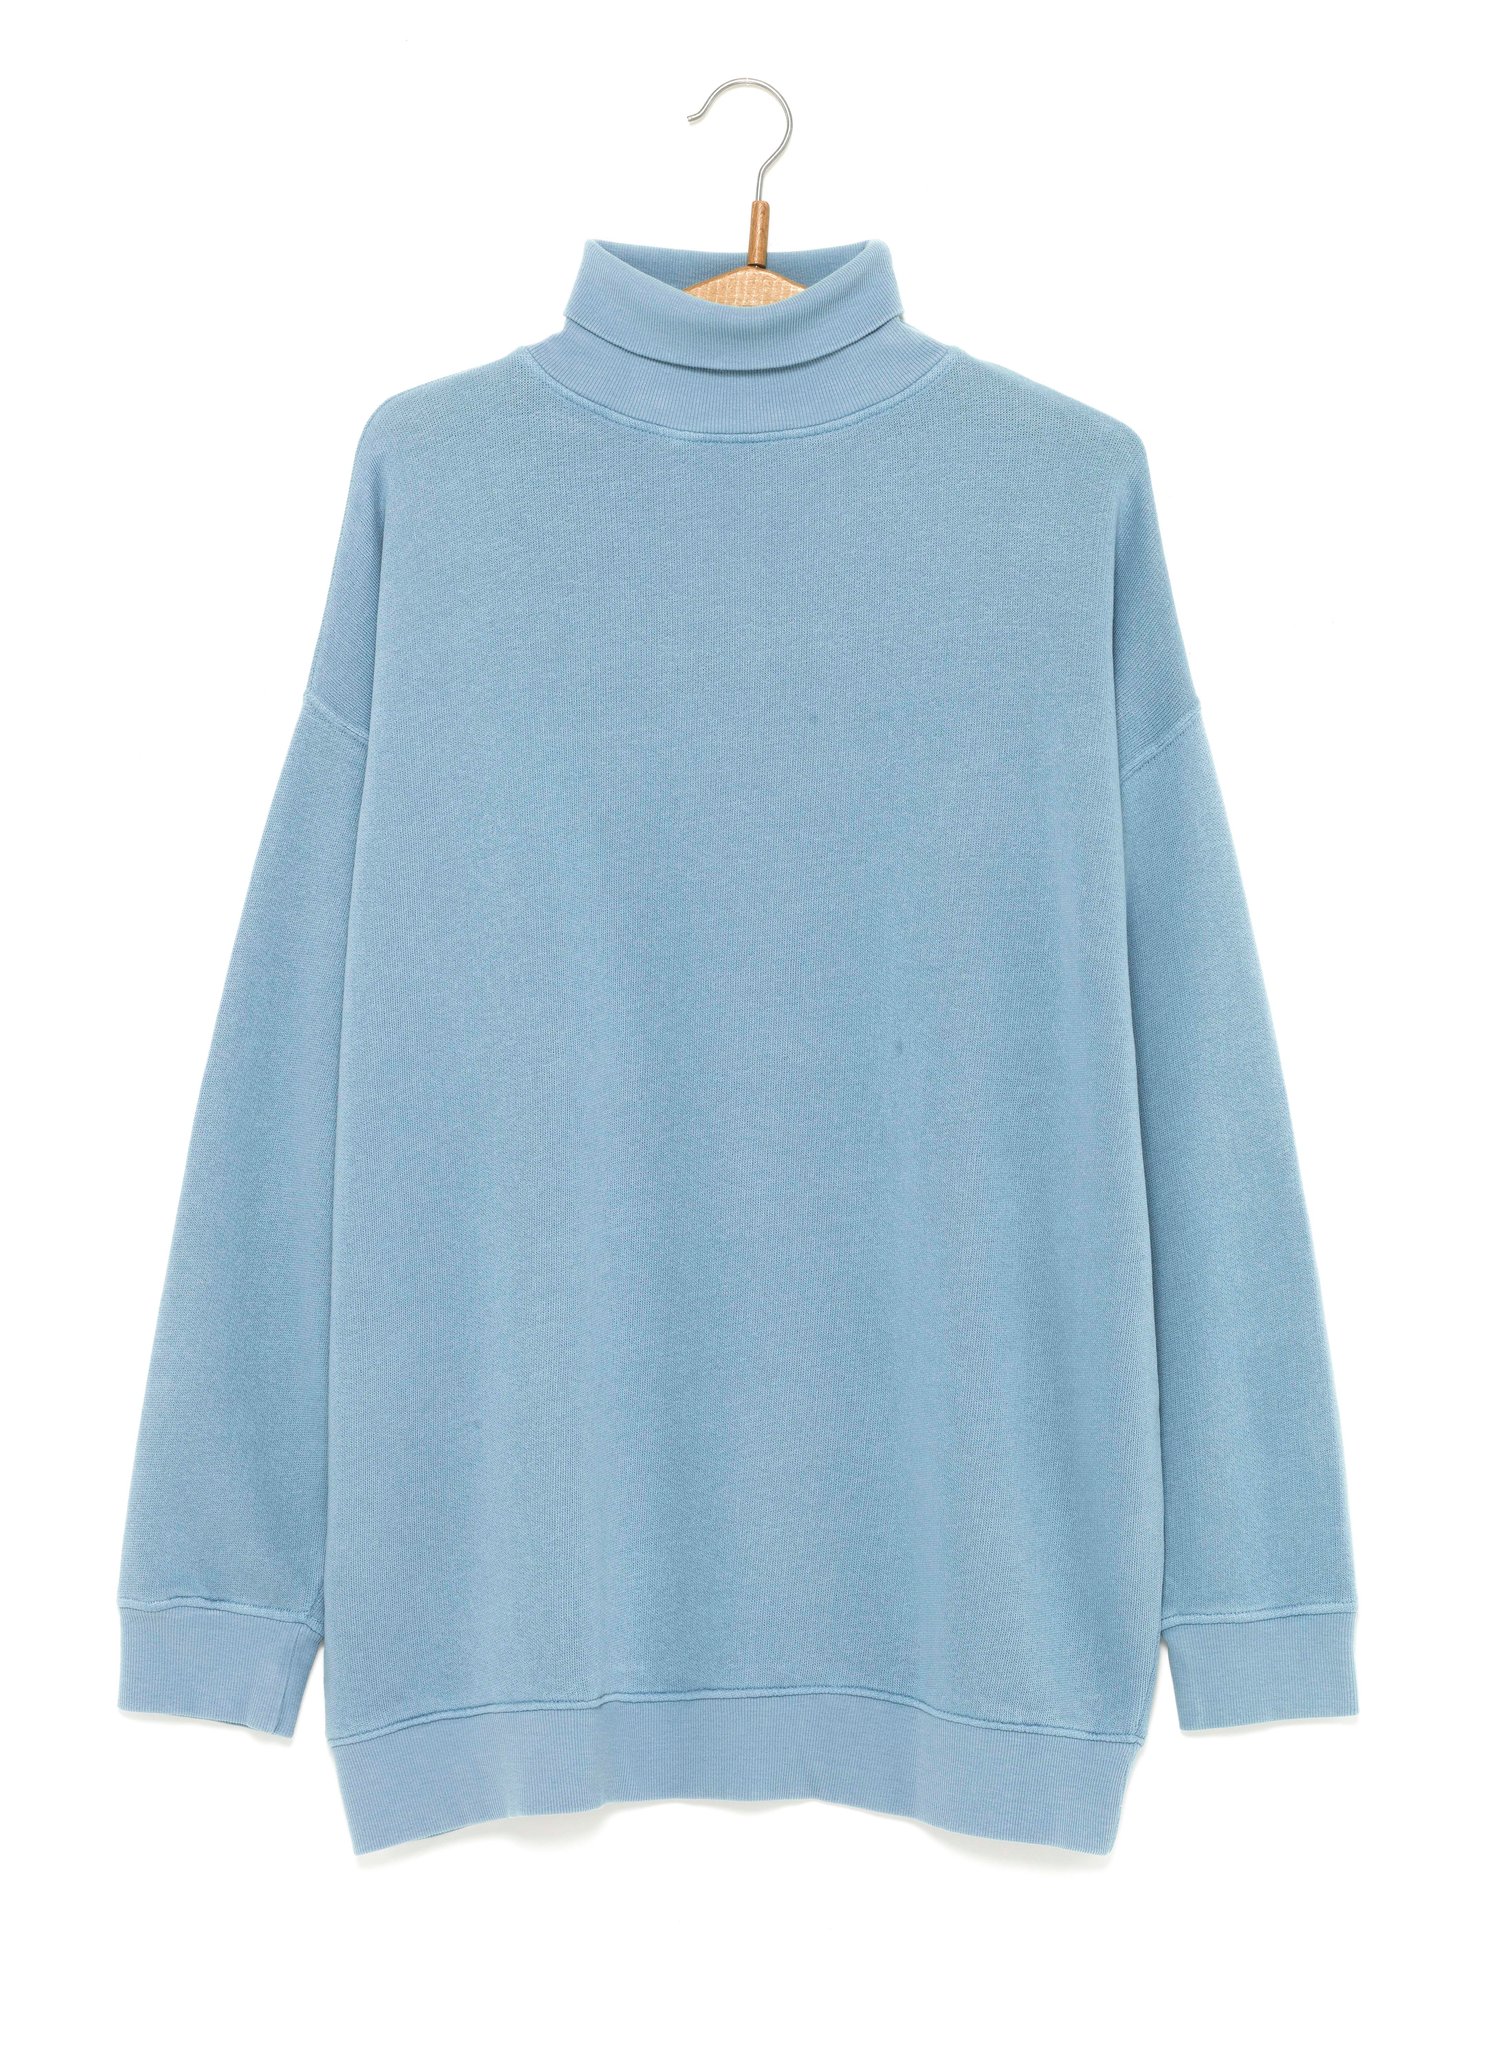 Image of Sweat molleton oversized col roulé CHANCE thym 99€ -50%